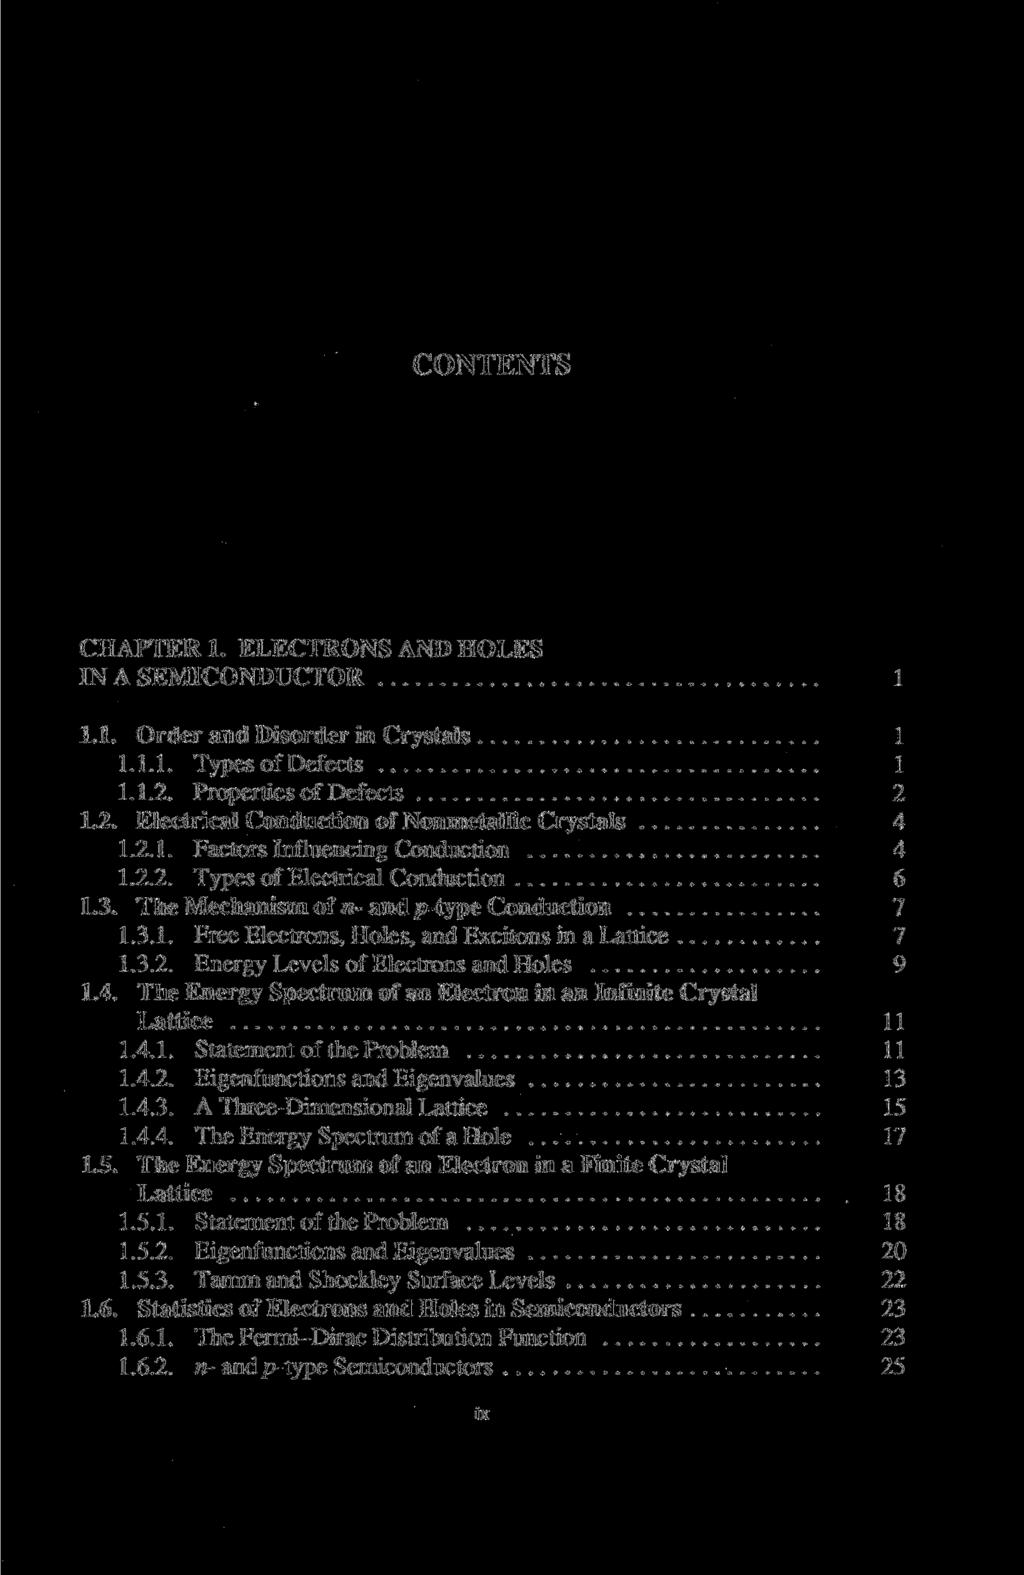 CONTENTS CHAPTER 1. ELECTRONS AND HOLES IN A SEMICONDUCTOR 1 1.1. Order and Disorder in Crystals 1 1.1.1. Types of Defects 1 1.1.2. Properties of Defects 2 1.2. Electrical Conduction of Nonmetallic Crystals 4 1.